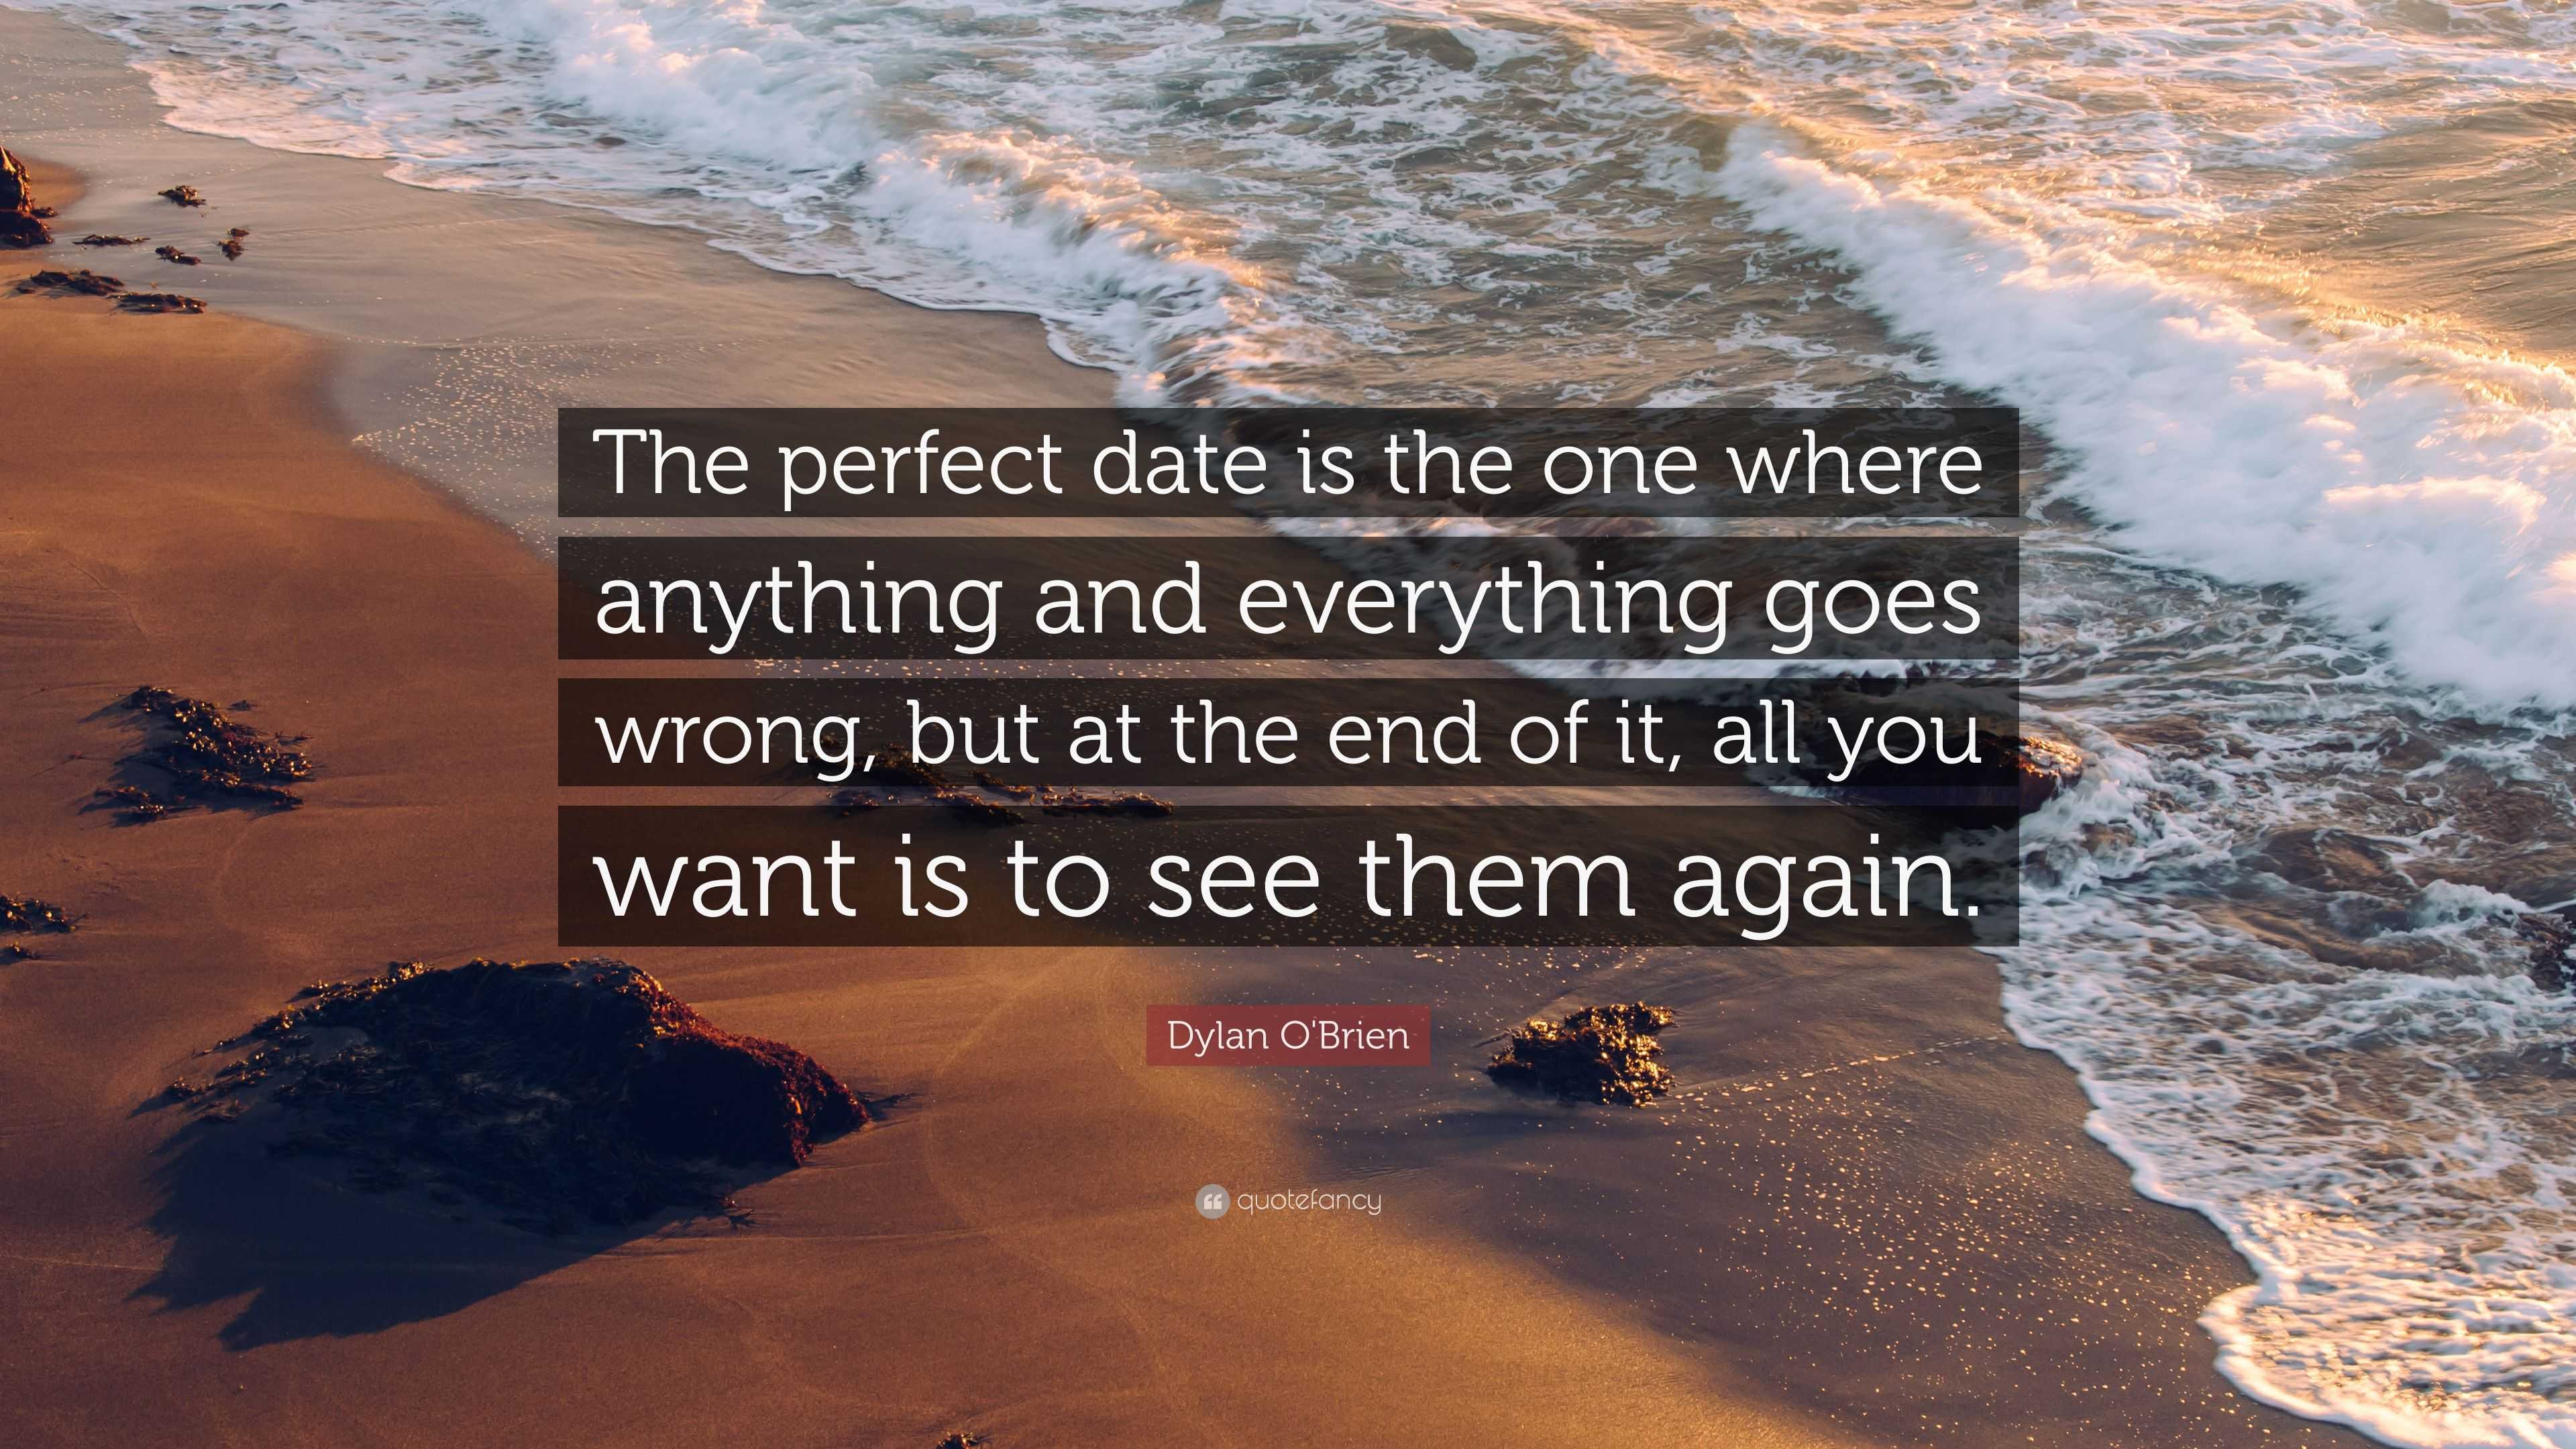 Dylan O'Brien Quote: “The perfect date is the one where anything and